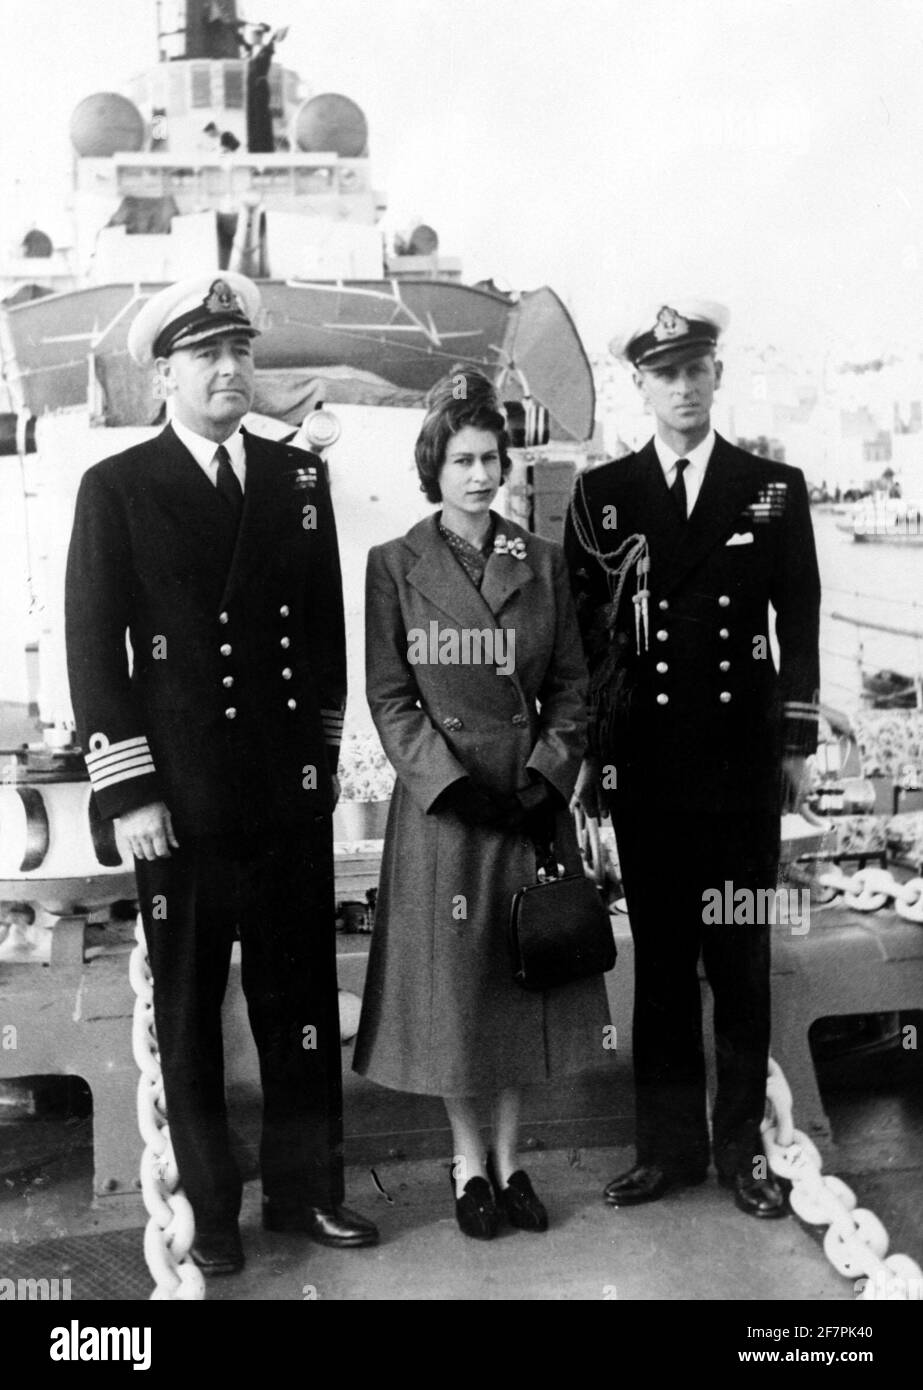 File photo dated 26/12/49 of The Duke of Edinburgh and Captain John Edwin Home McBeath DSO, DSC, RN (left), pose with Queen Elizabeth II for a photograph on HMS Chequers, during the Boxing Day visit to the destroyer that the Duke is currently serving on. Philip joined the Navy after leaving school and in May 1939 enrolled at the Royal Naval College in Dartmouth, where he was singled out as best cadet. He rose rapidly through the ranks, earning promotion after promotion, but his life was to take a very different course. The dukeÕs flourishing naval career came to a premature end in 1951. Philip Stock Photo